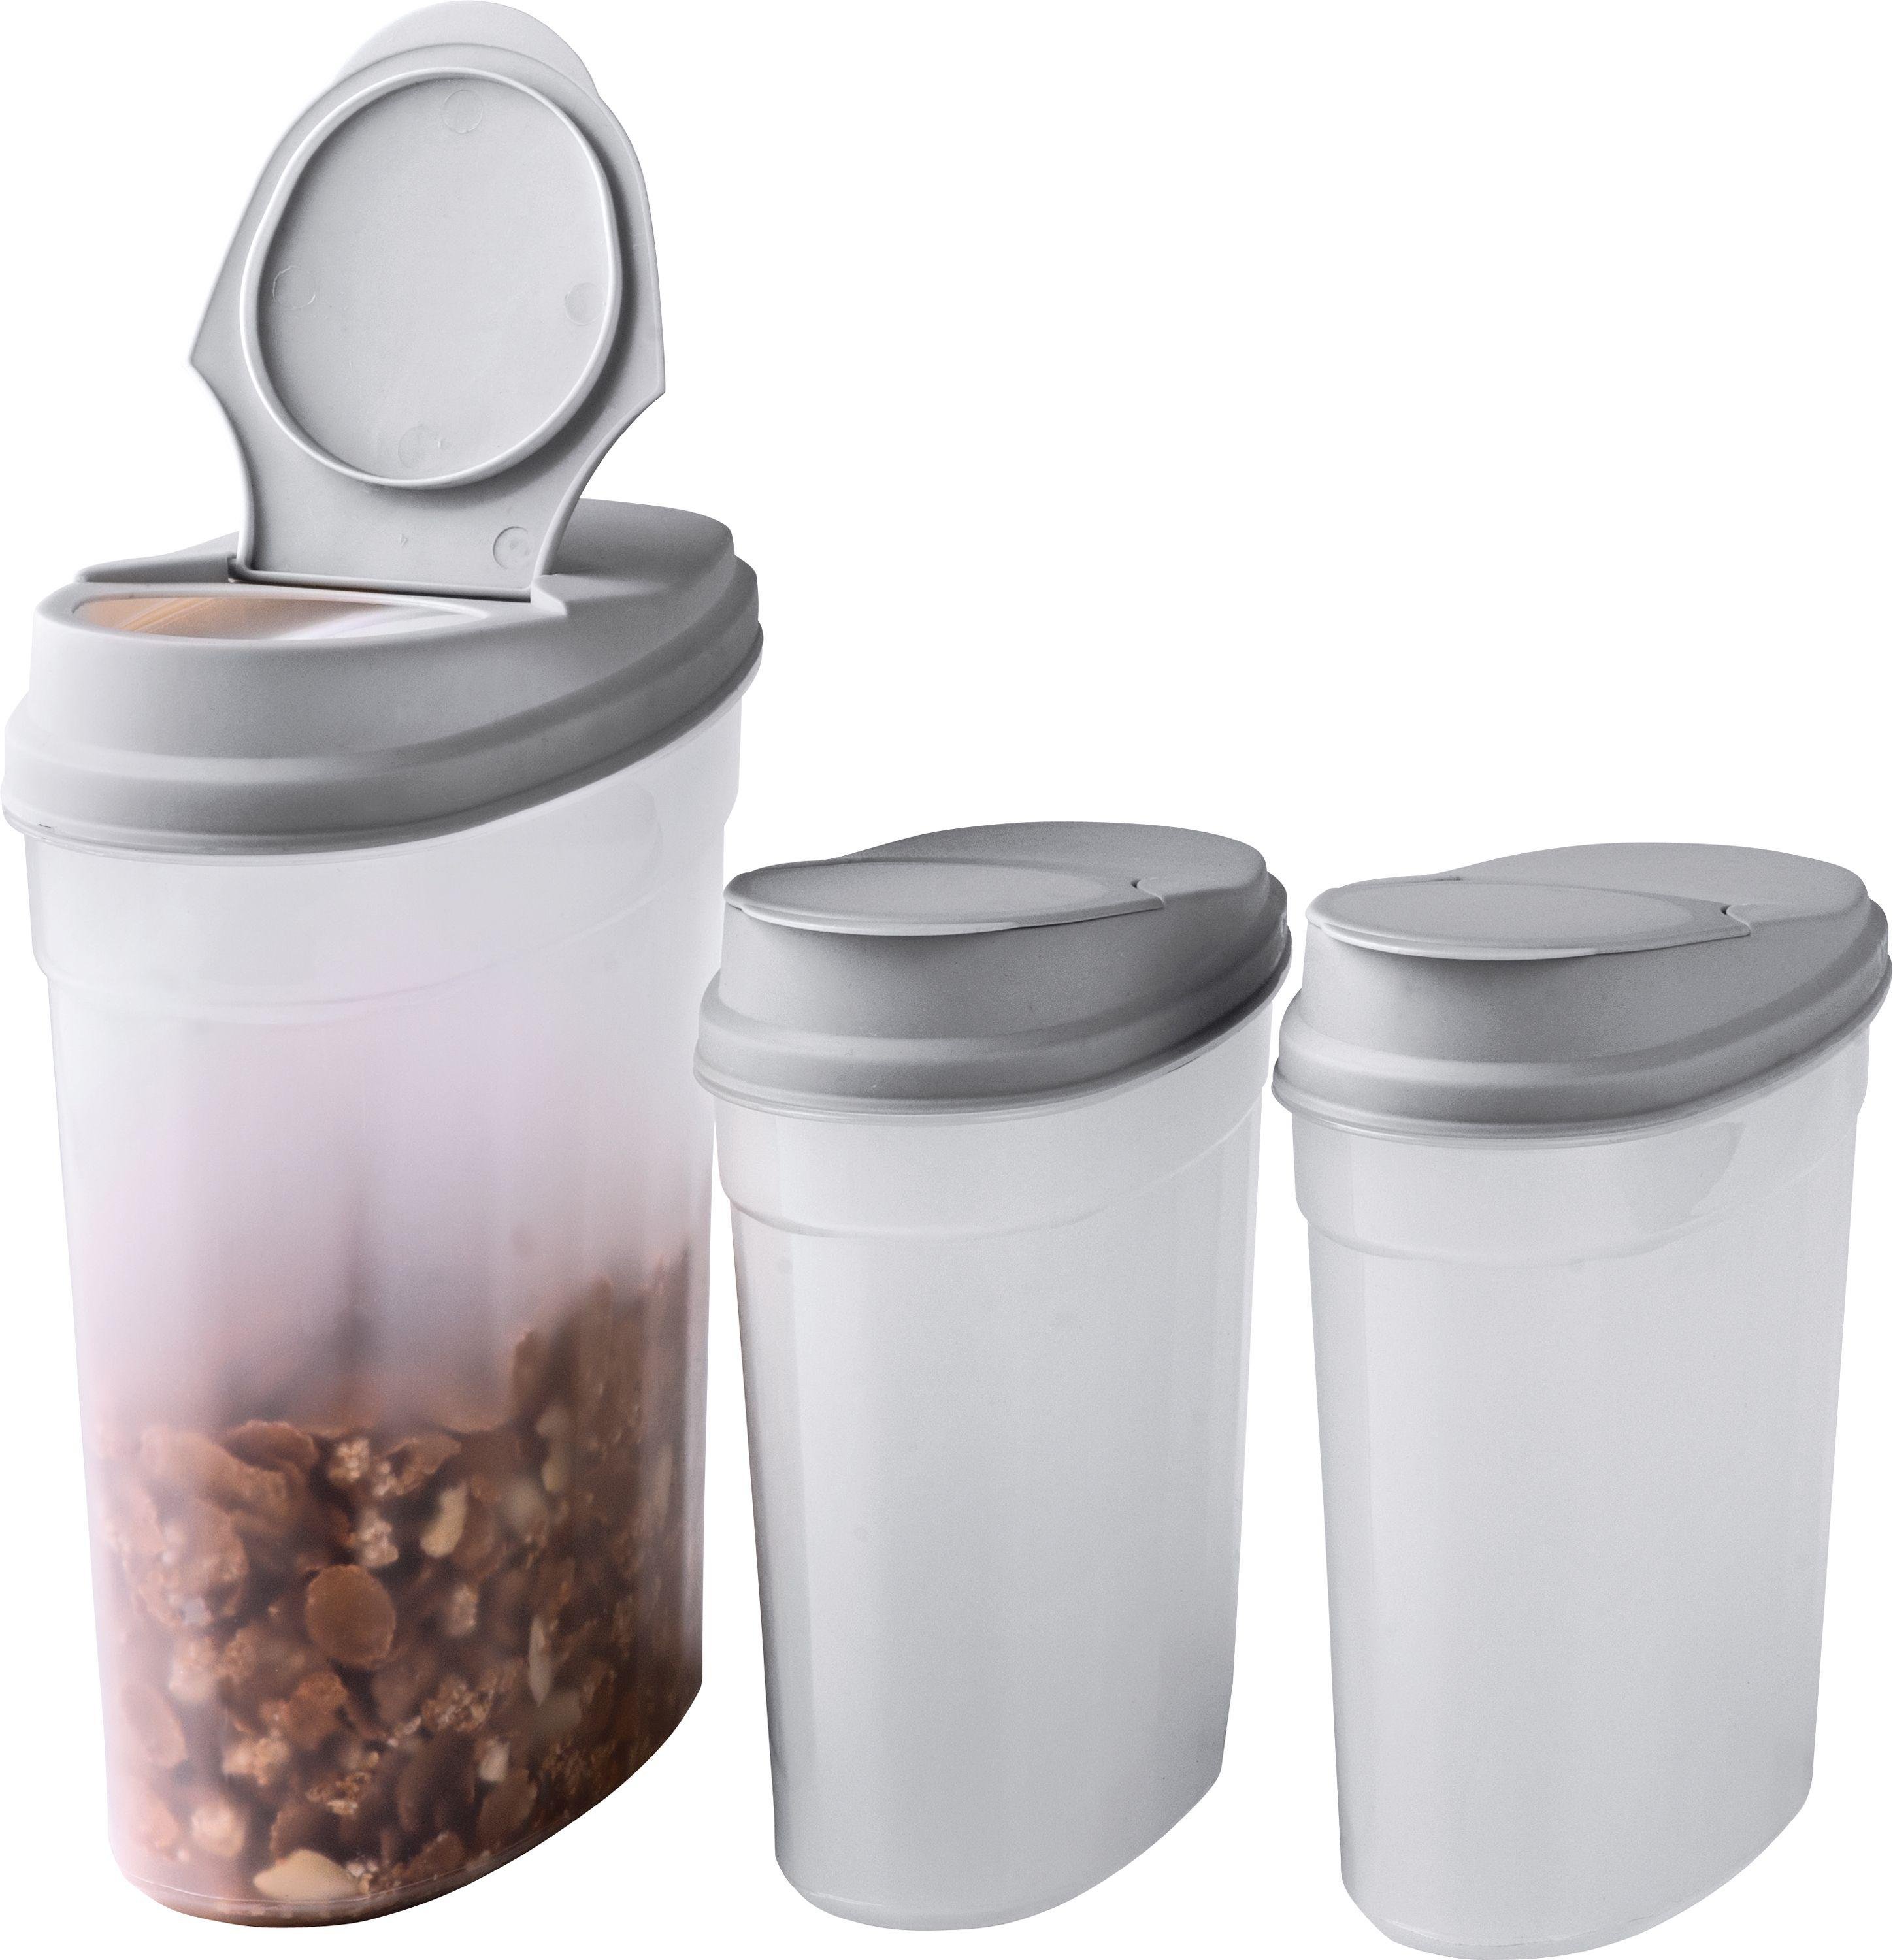 HOME Plastic Cereal Containers Pack of 3 Review